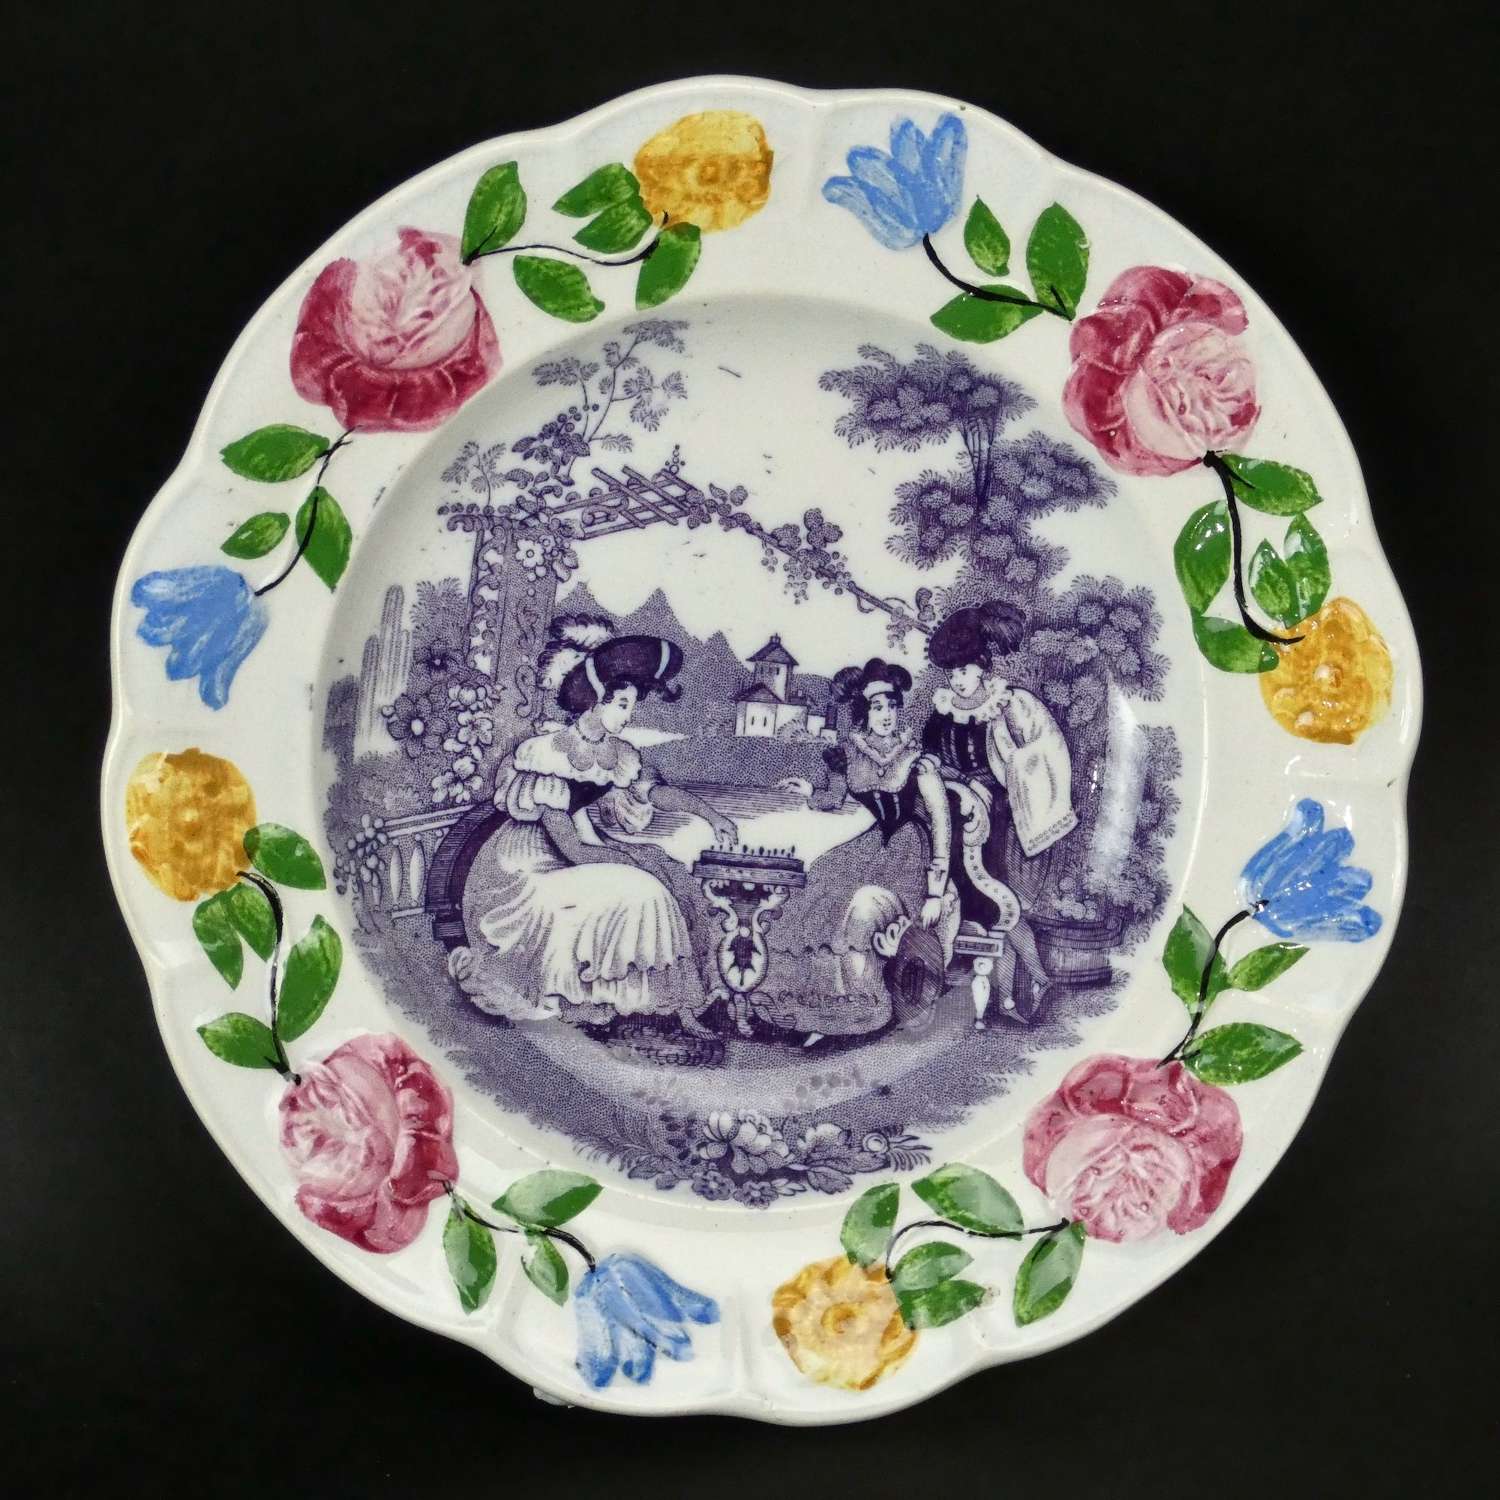 Child's plate with mauve transfer print